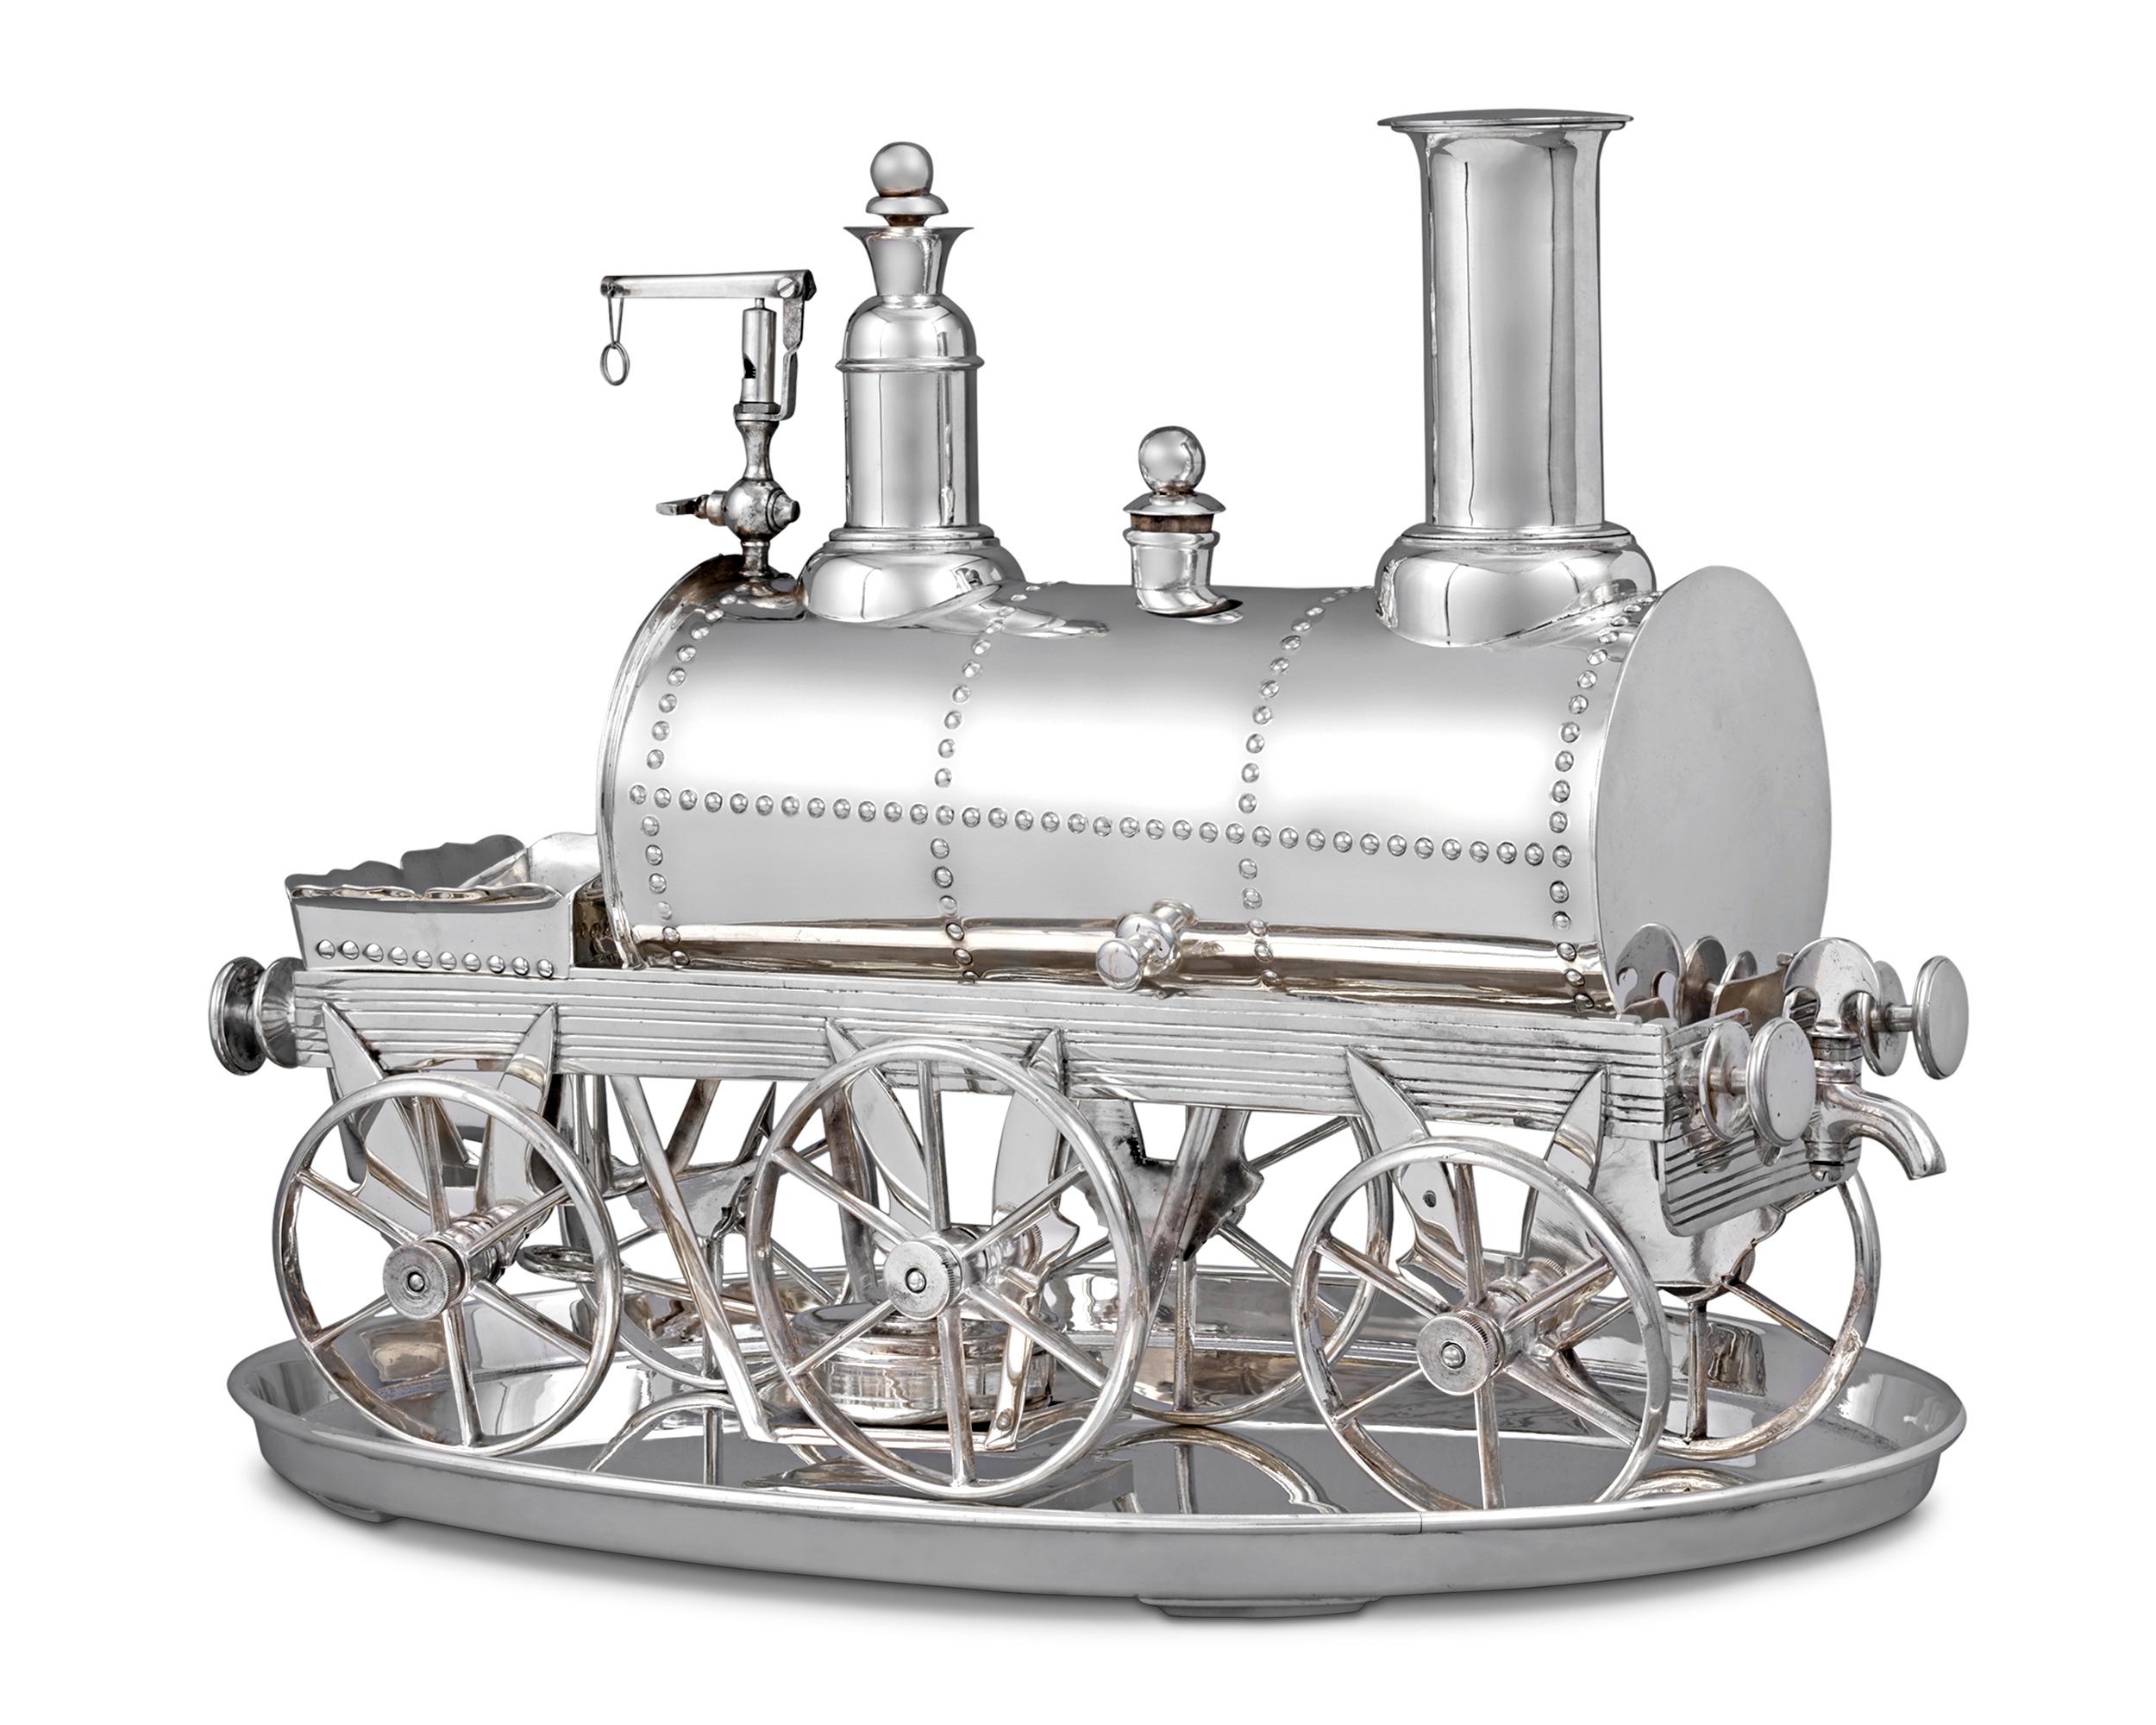 This exceptionally rare English silverplate tea urn takes the playful form of a locomotive. Made to heat and dispense tea, the urn features an opening for tea and an opening for hot water, as well as a container to store sugar cubes. Meticulously